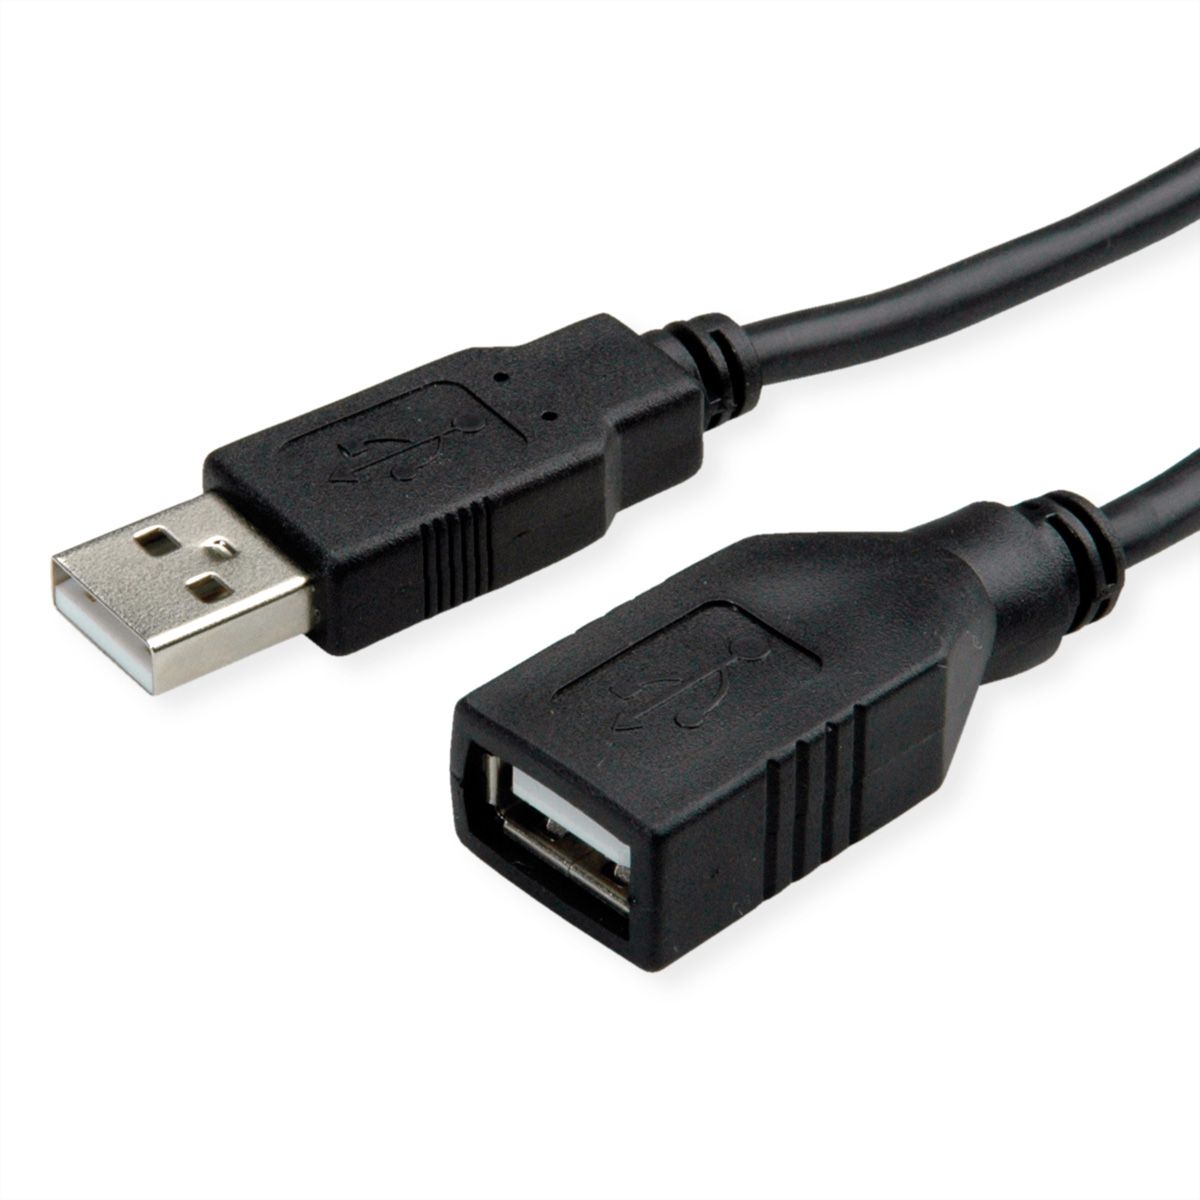 15M USB 2.0 Type A Male to Female Extension Extender Cable Cord Black 15m 